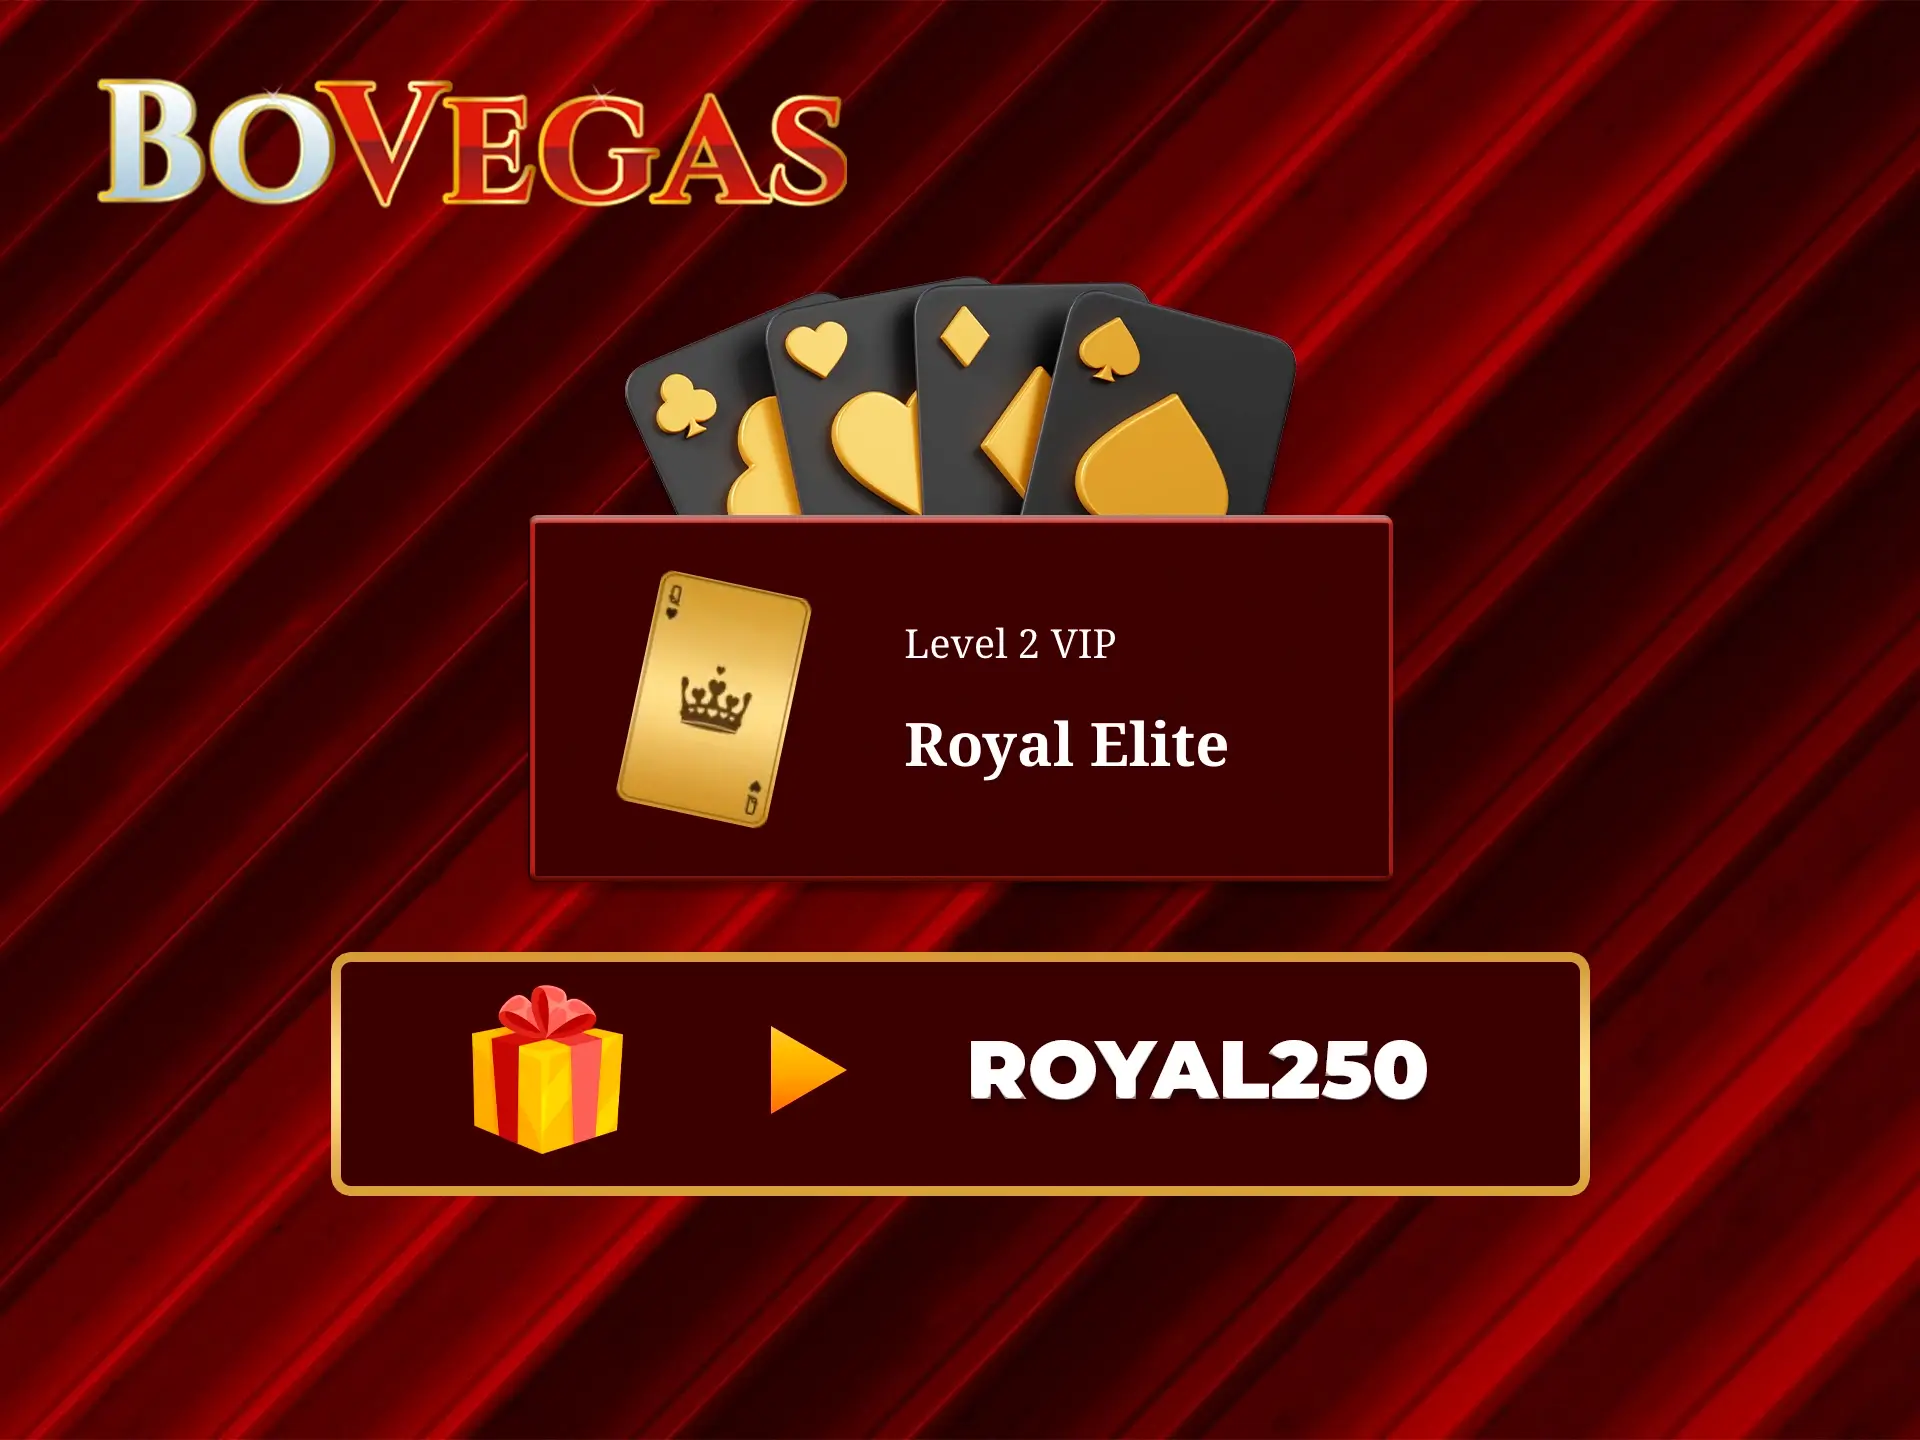 Play more and you'll get a new account level that will give you new features at BoVegas Casino.